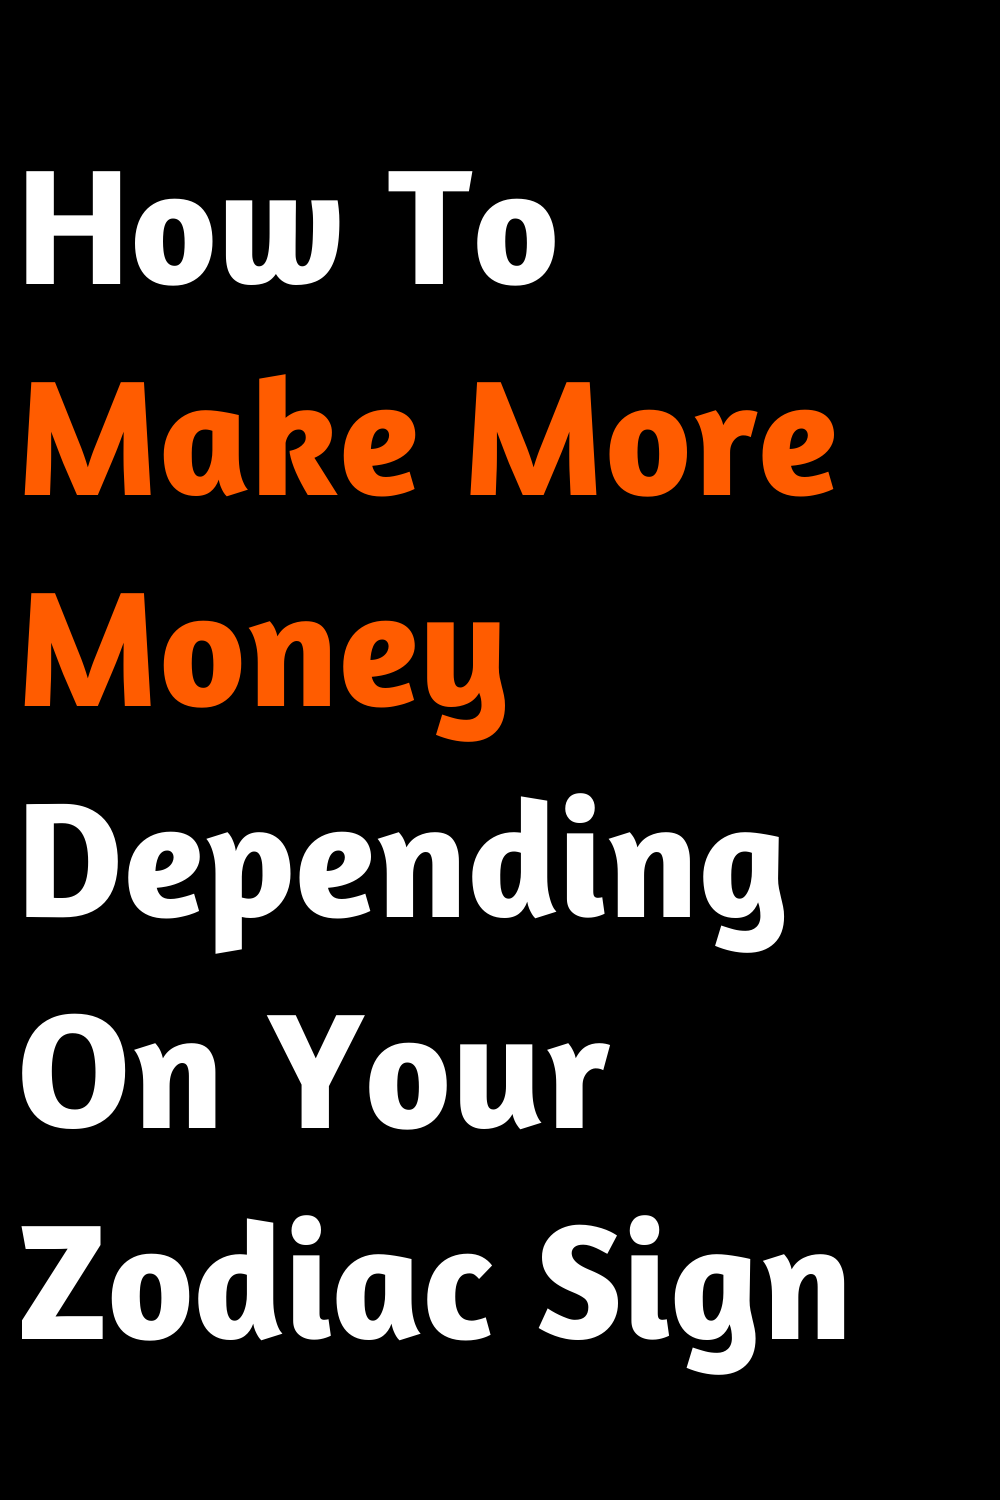 How To Make More Money Depending On Your Zodiac Sign